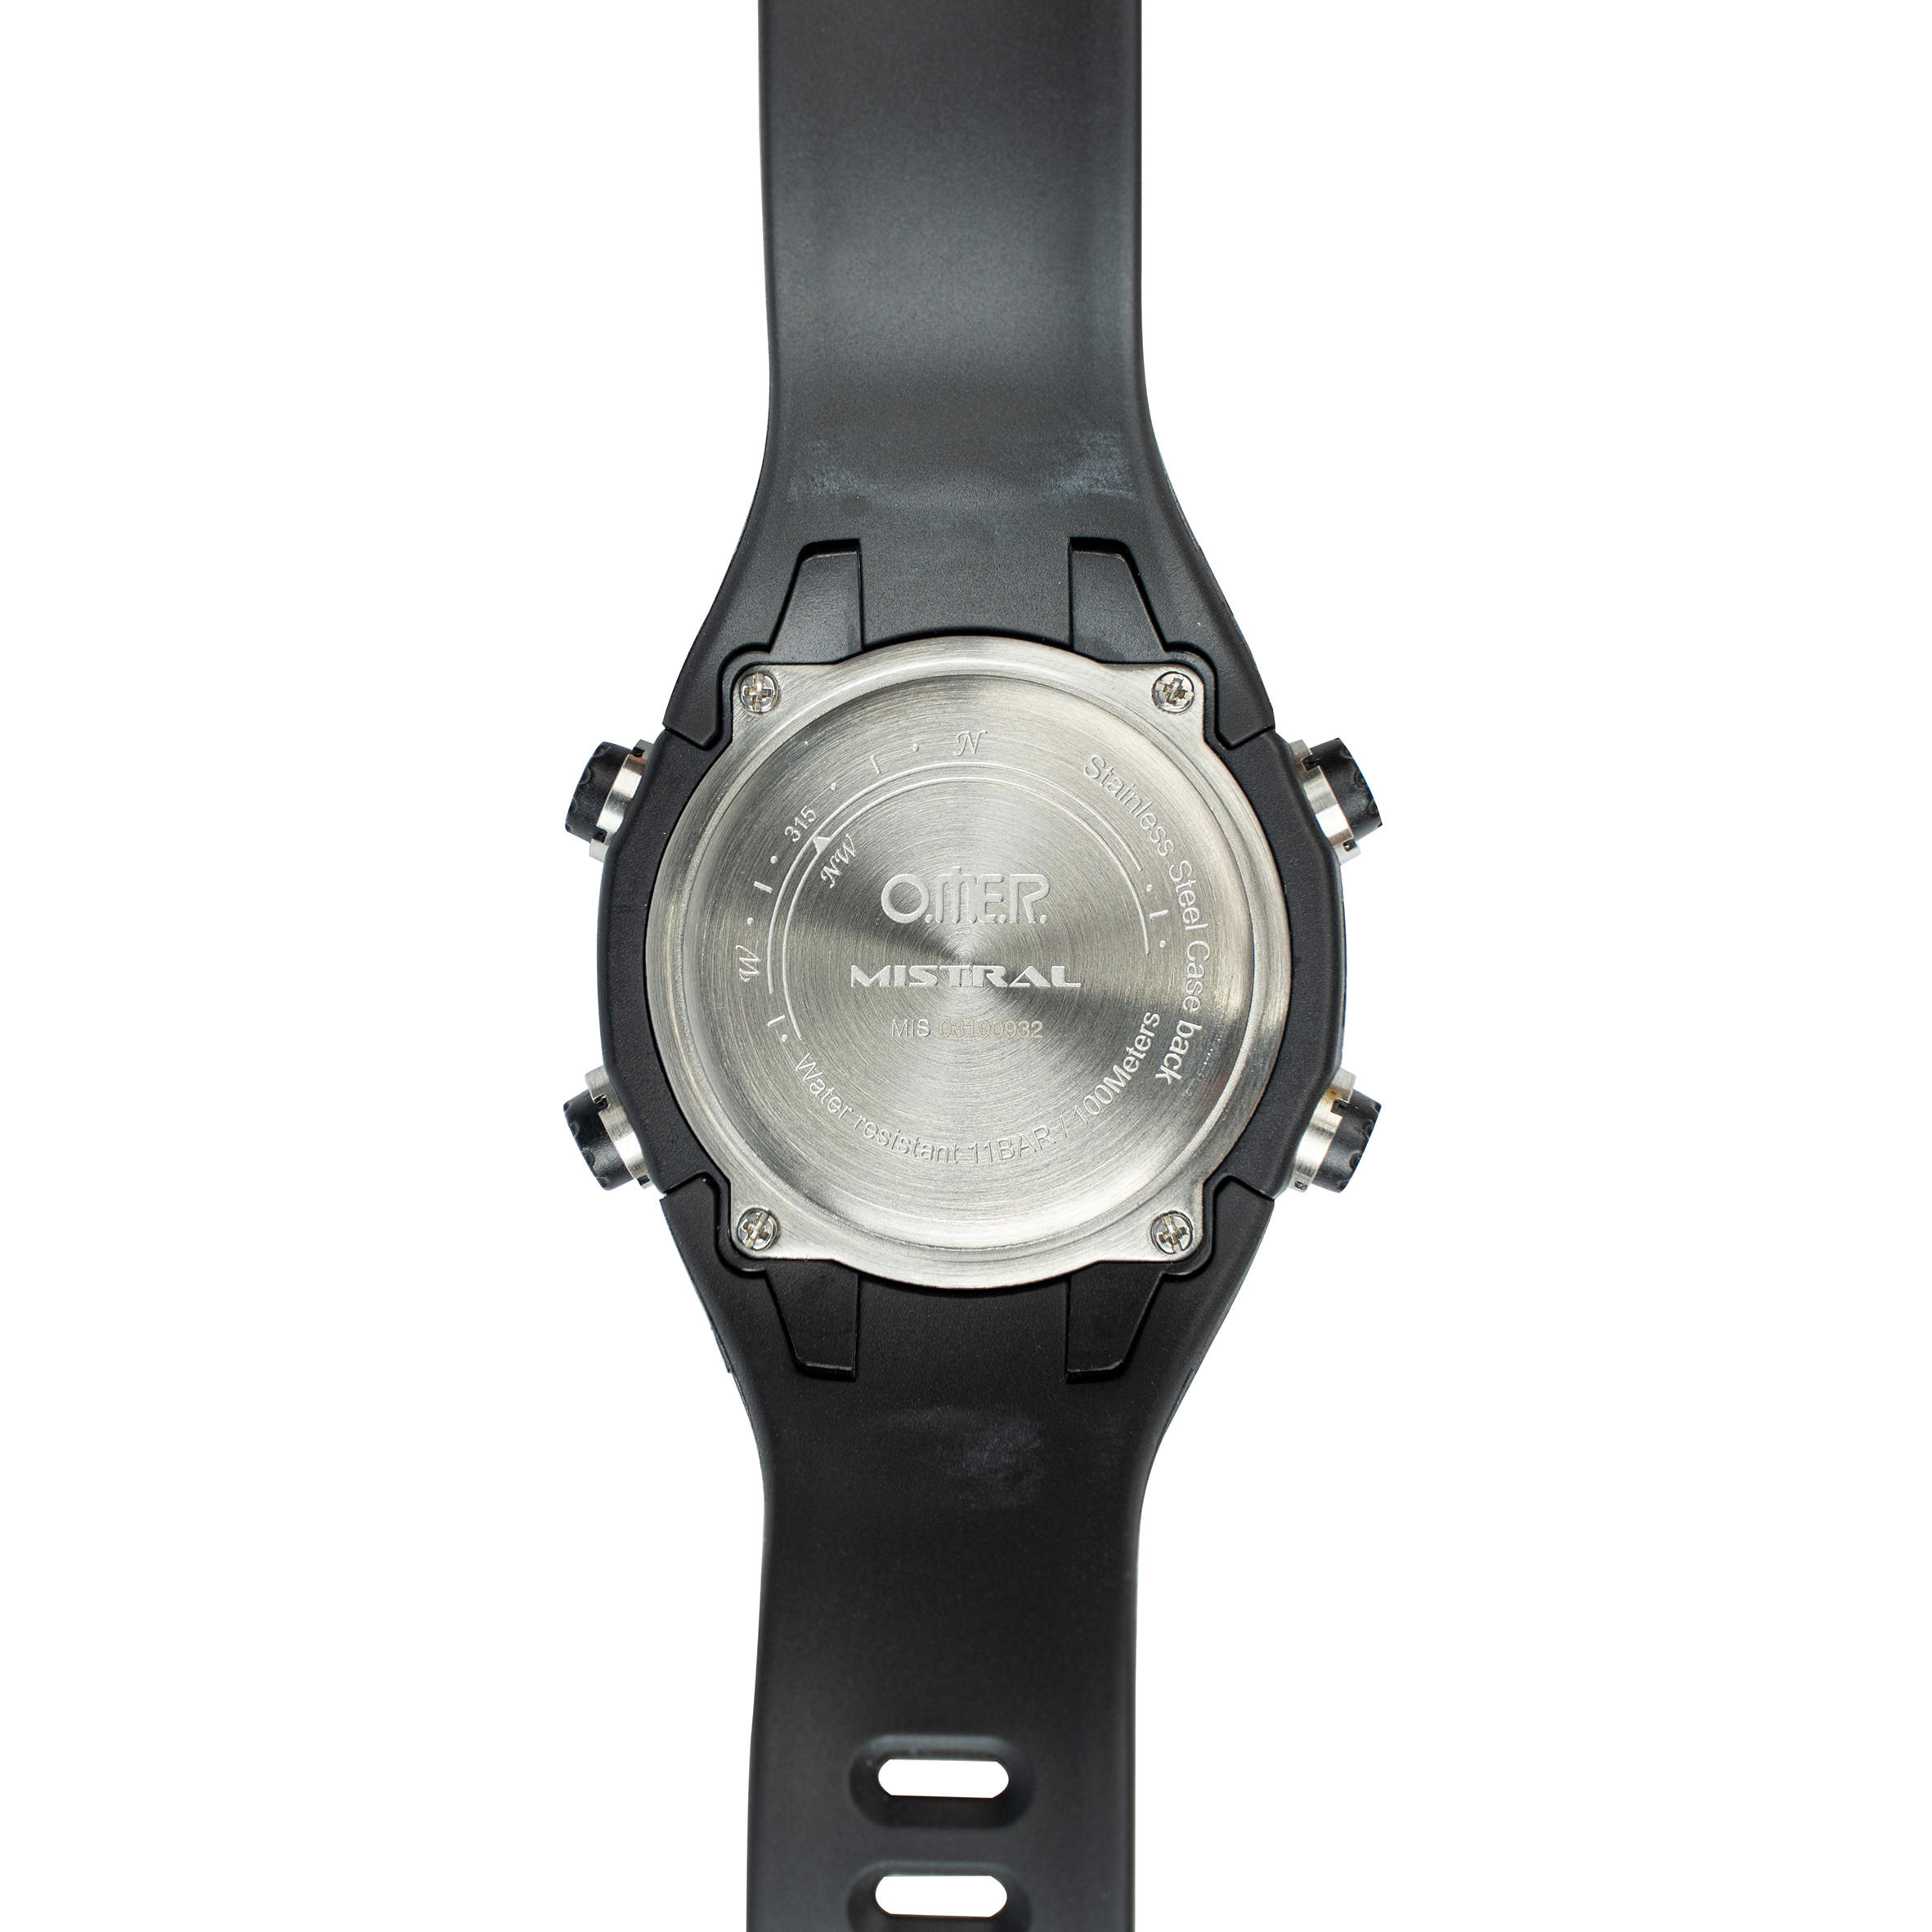 Spearfishing and Free-Diving Dive Computer Watch Mistral 6/9